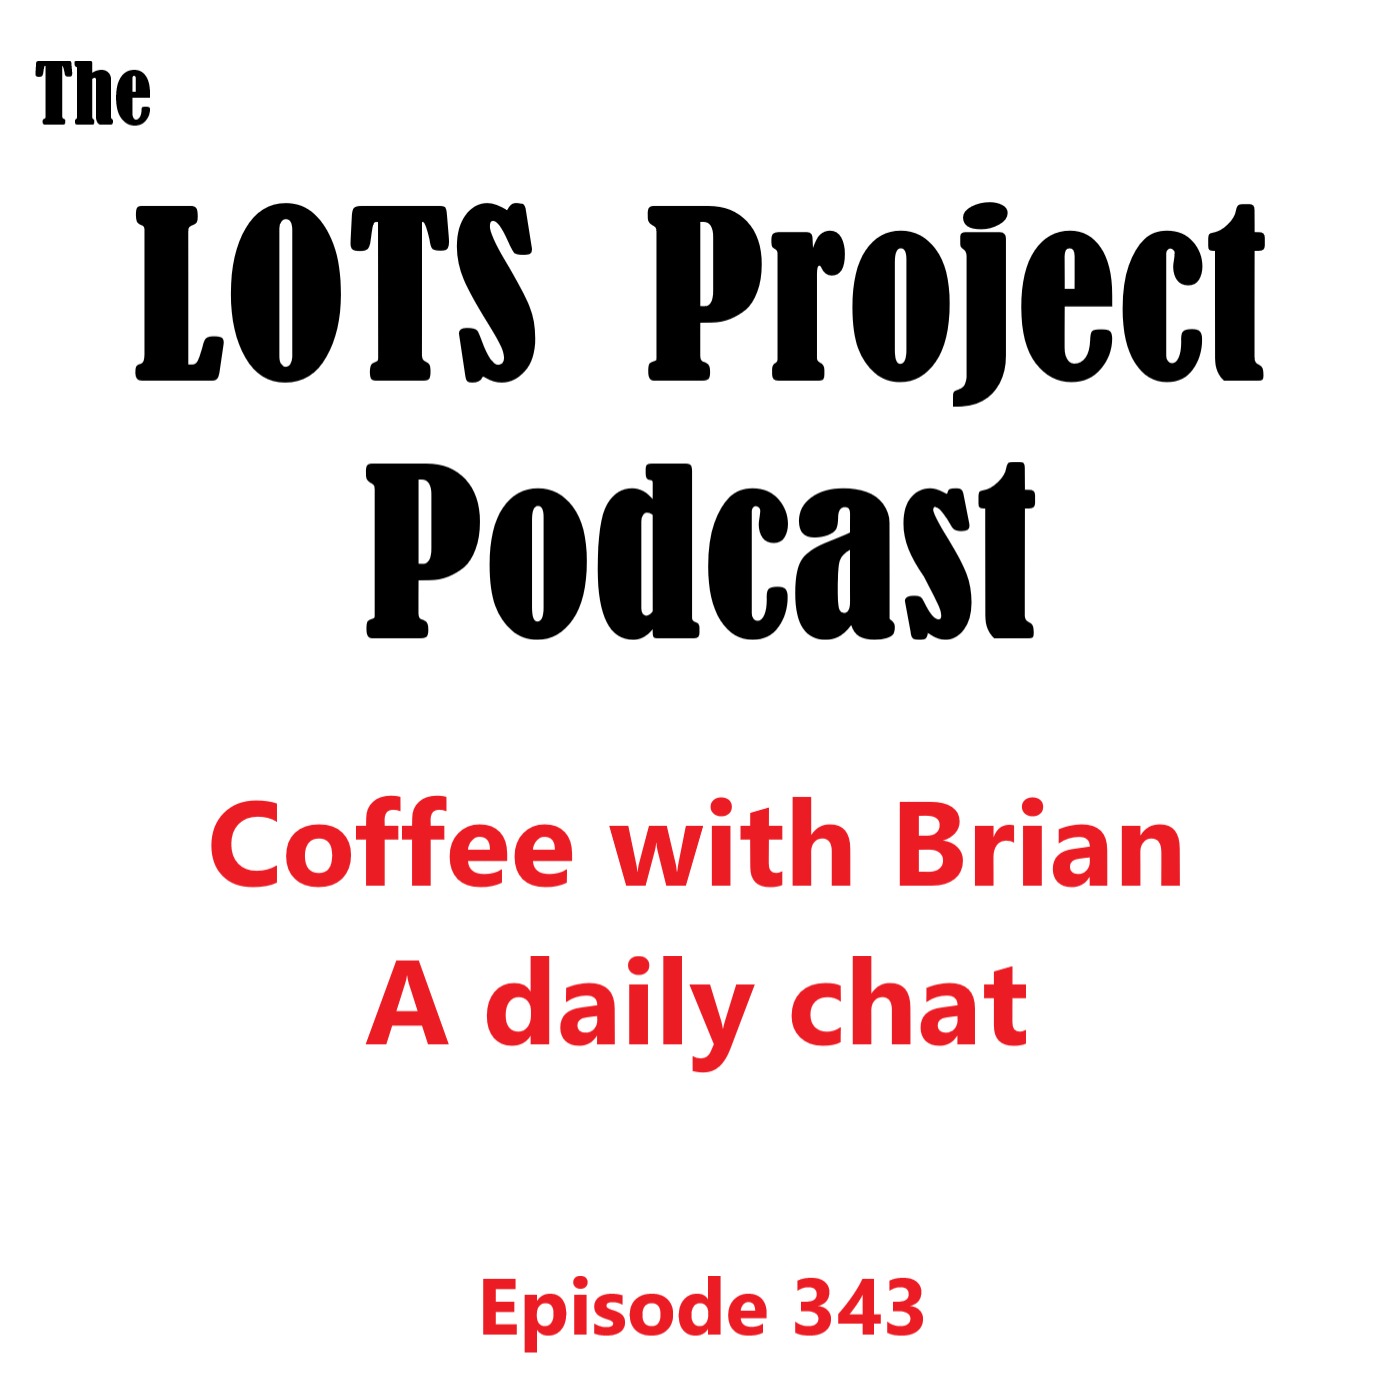 Episode 343 Coffee with Brian, A Daily Morning Chat #podcast #daily #nomad #coffee  ⚡lots@getalby.com